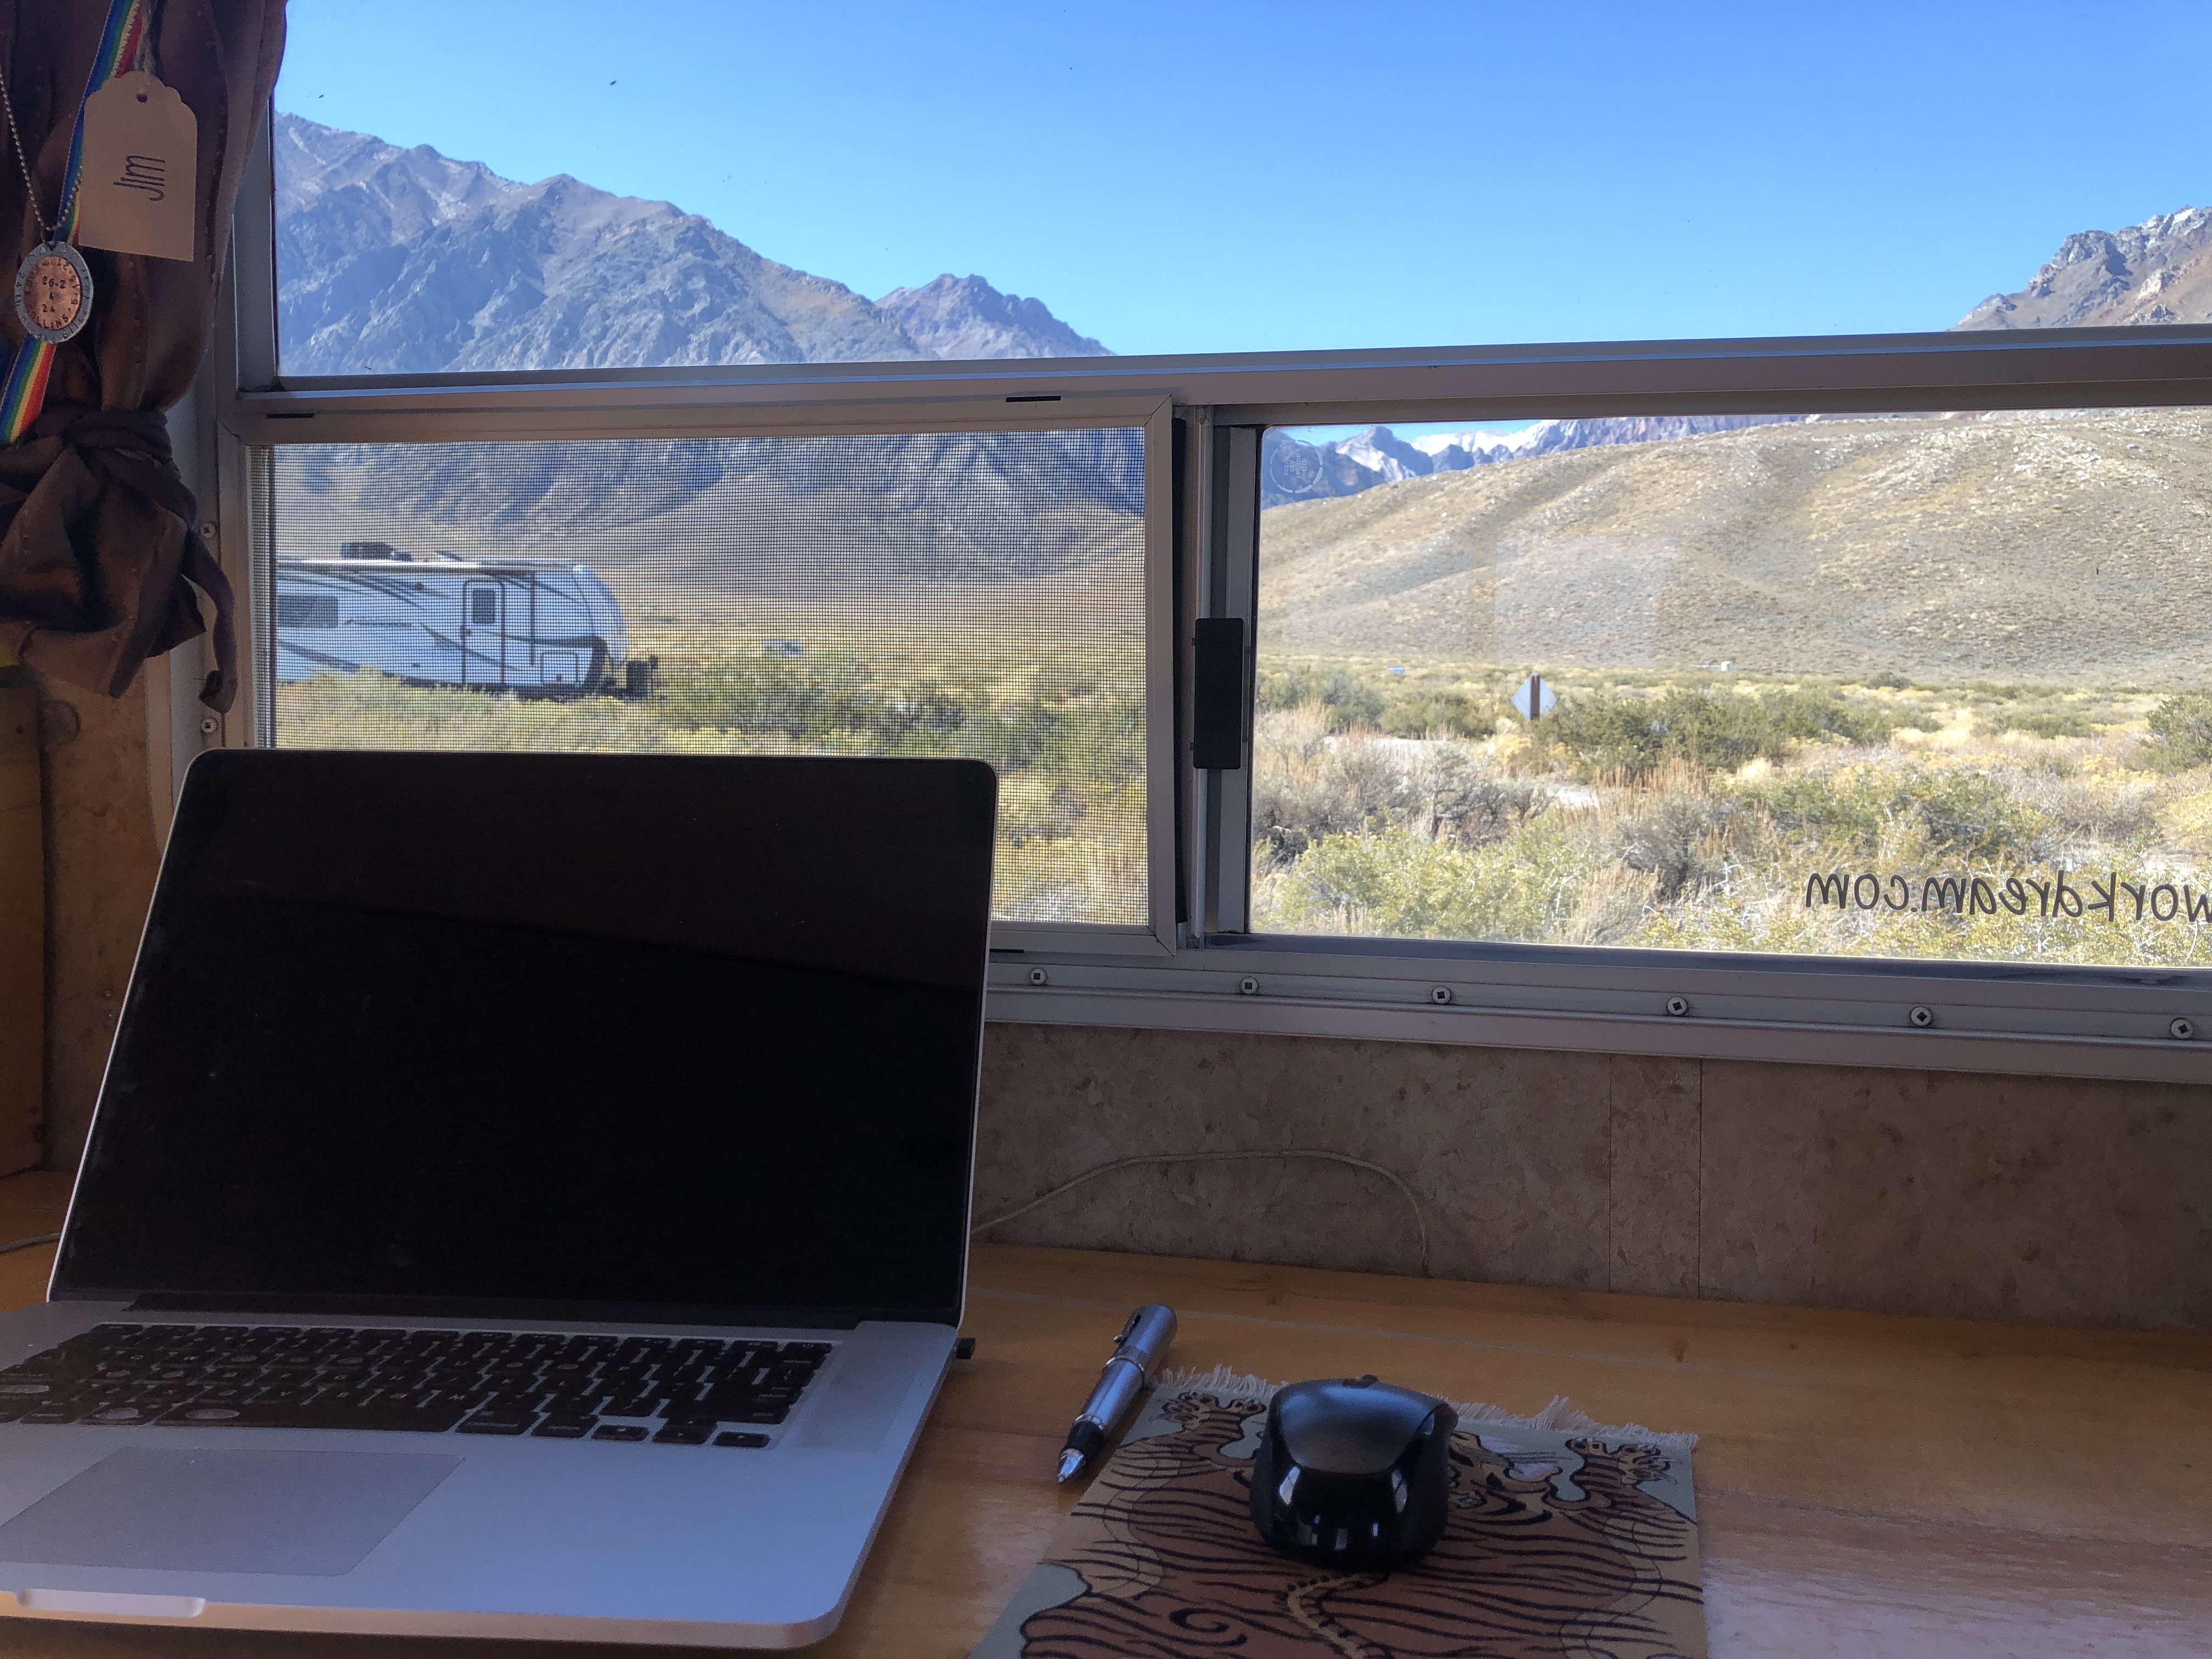 A laptop on a desk overlooking a landscape of rocky mountains, rolling hill, desert scrub and lone trailer.